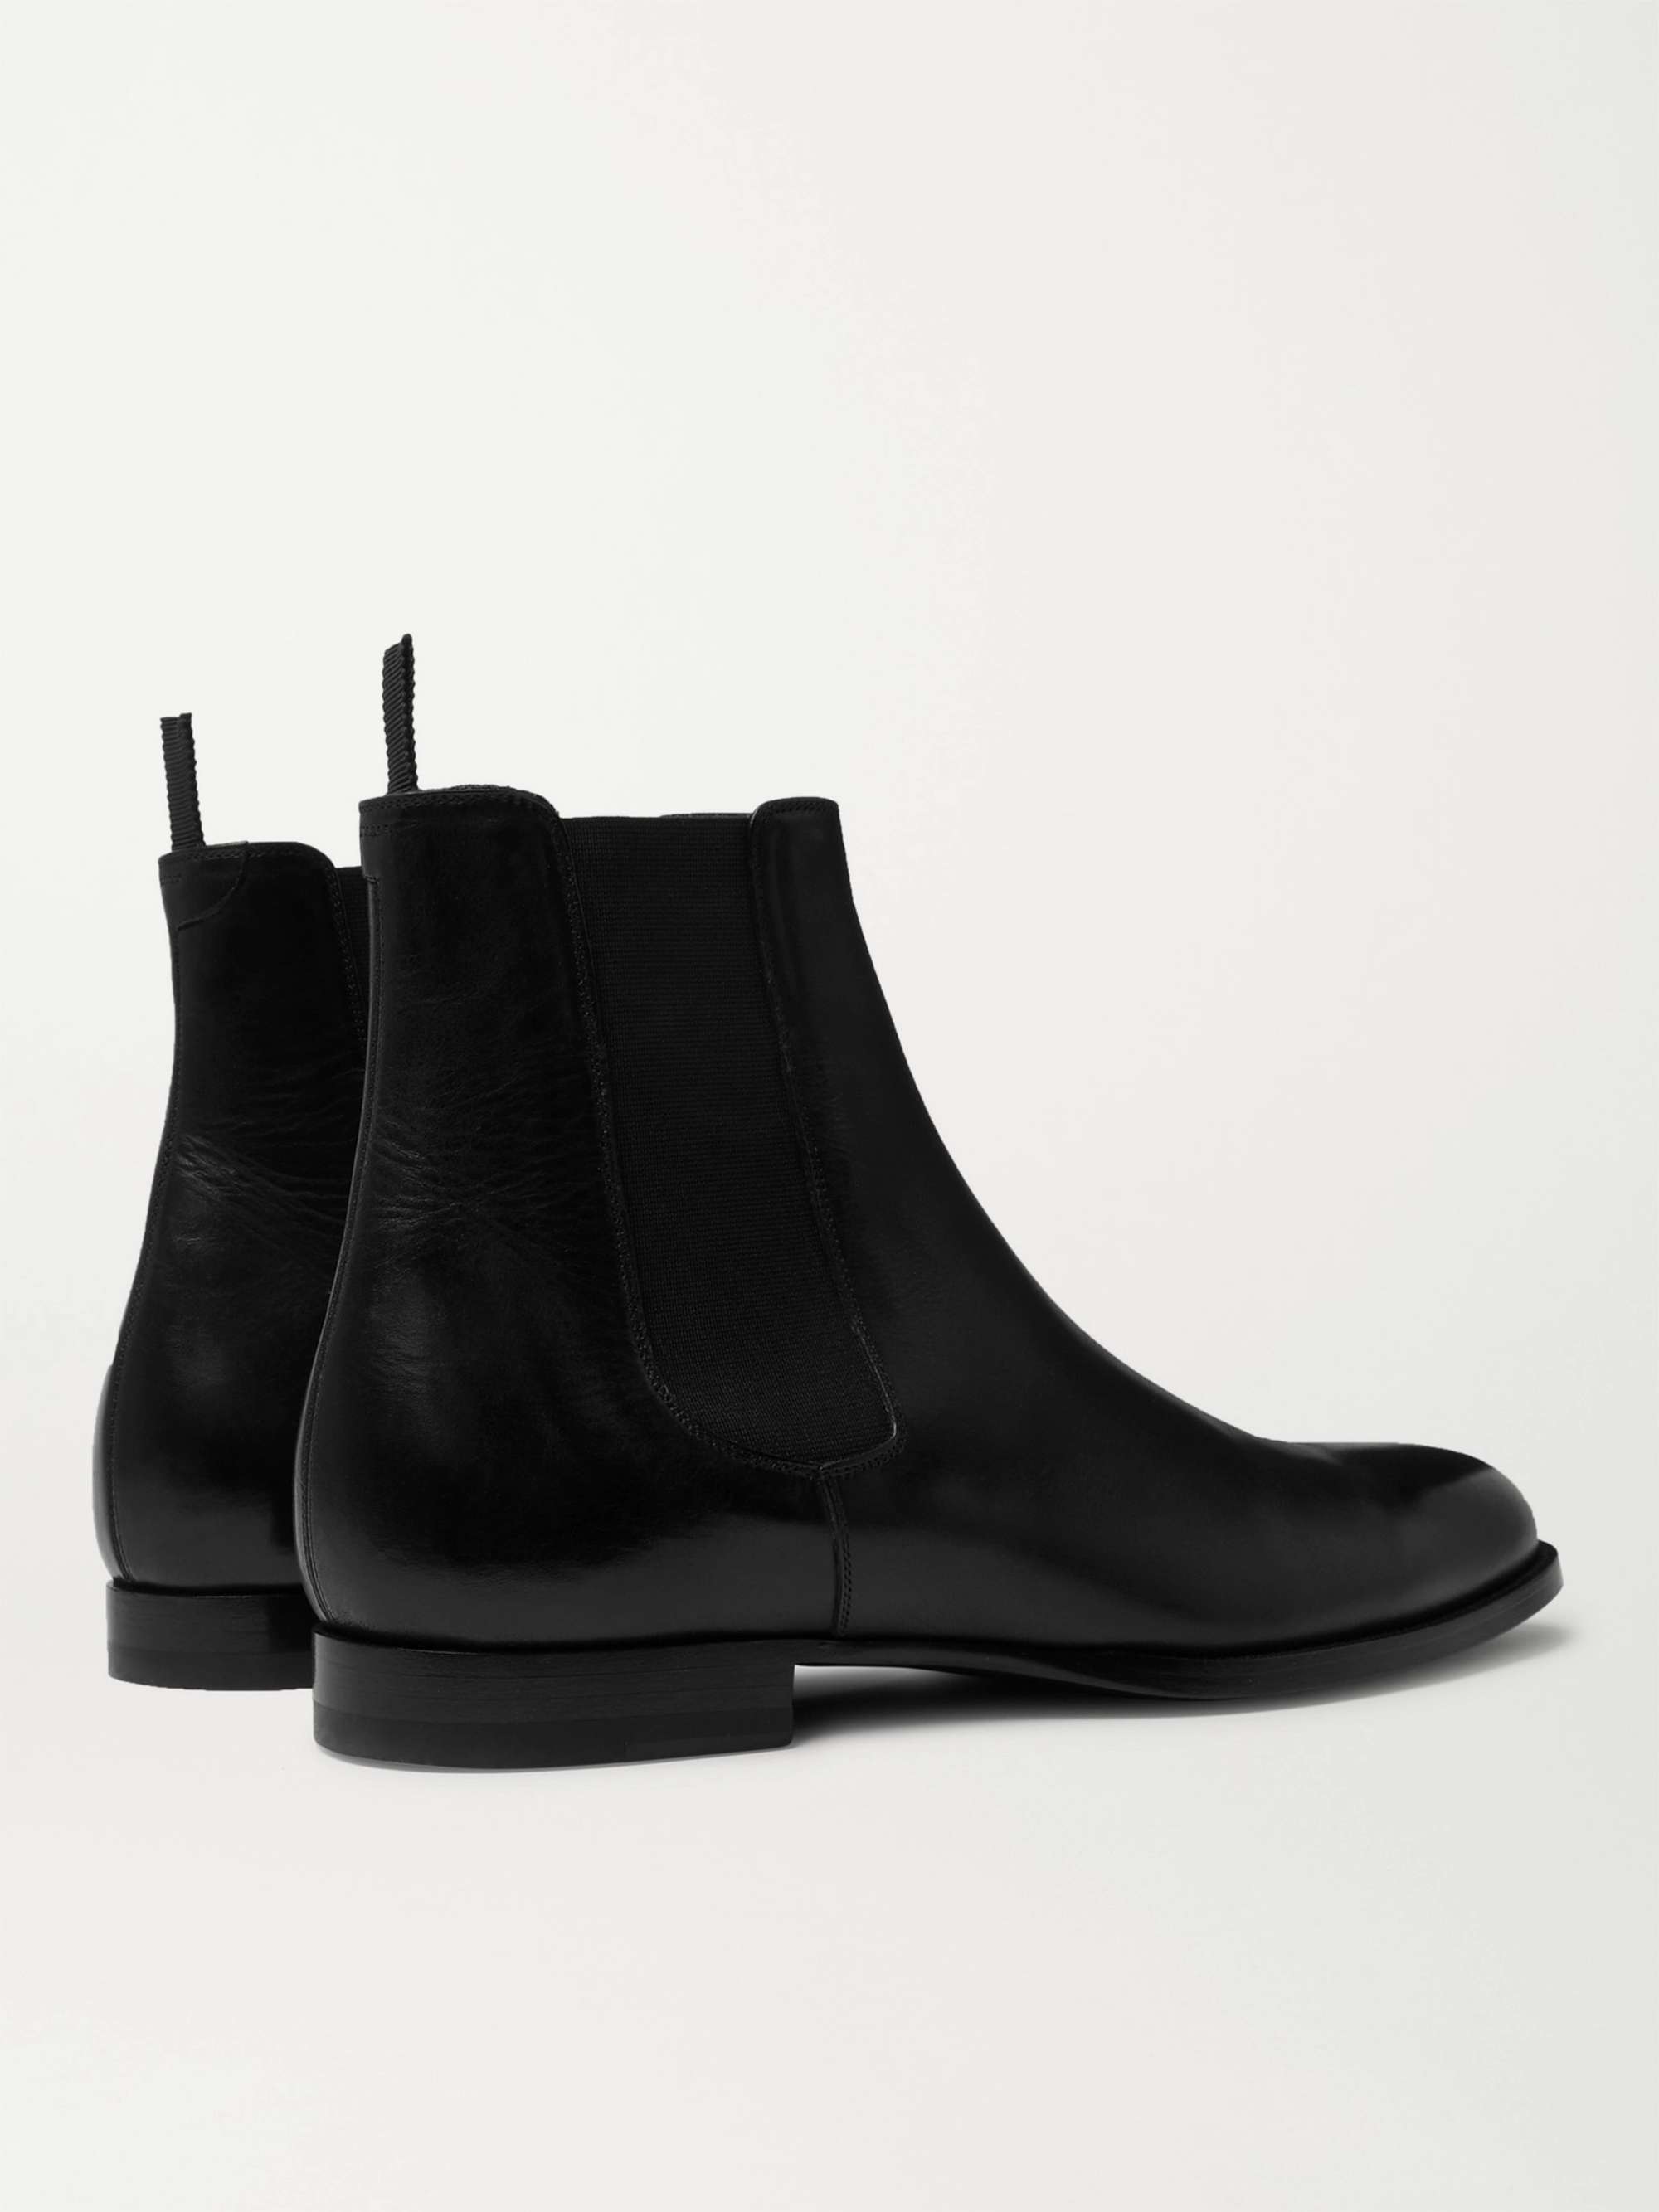 CELINE HOMME Leather Chelsea Boots